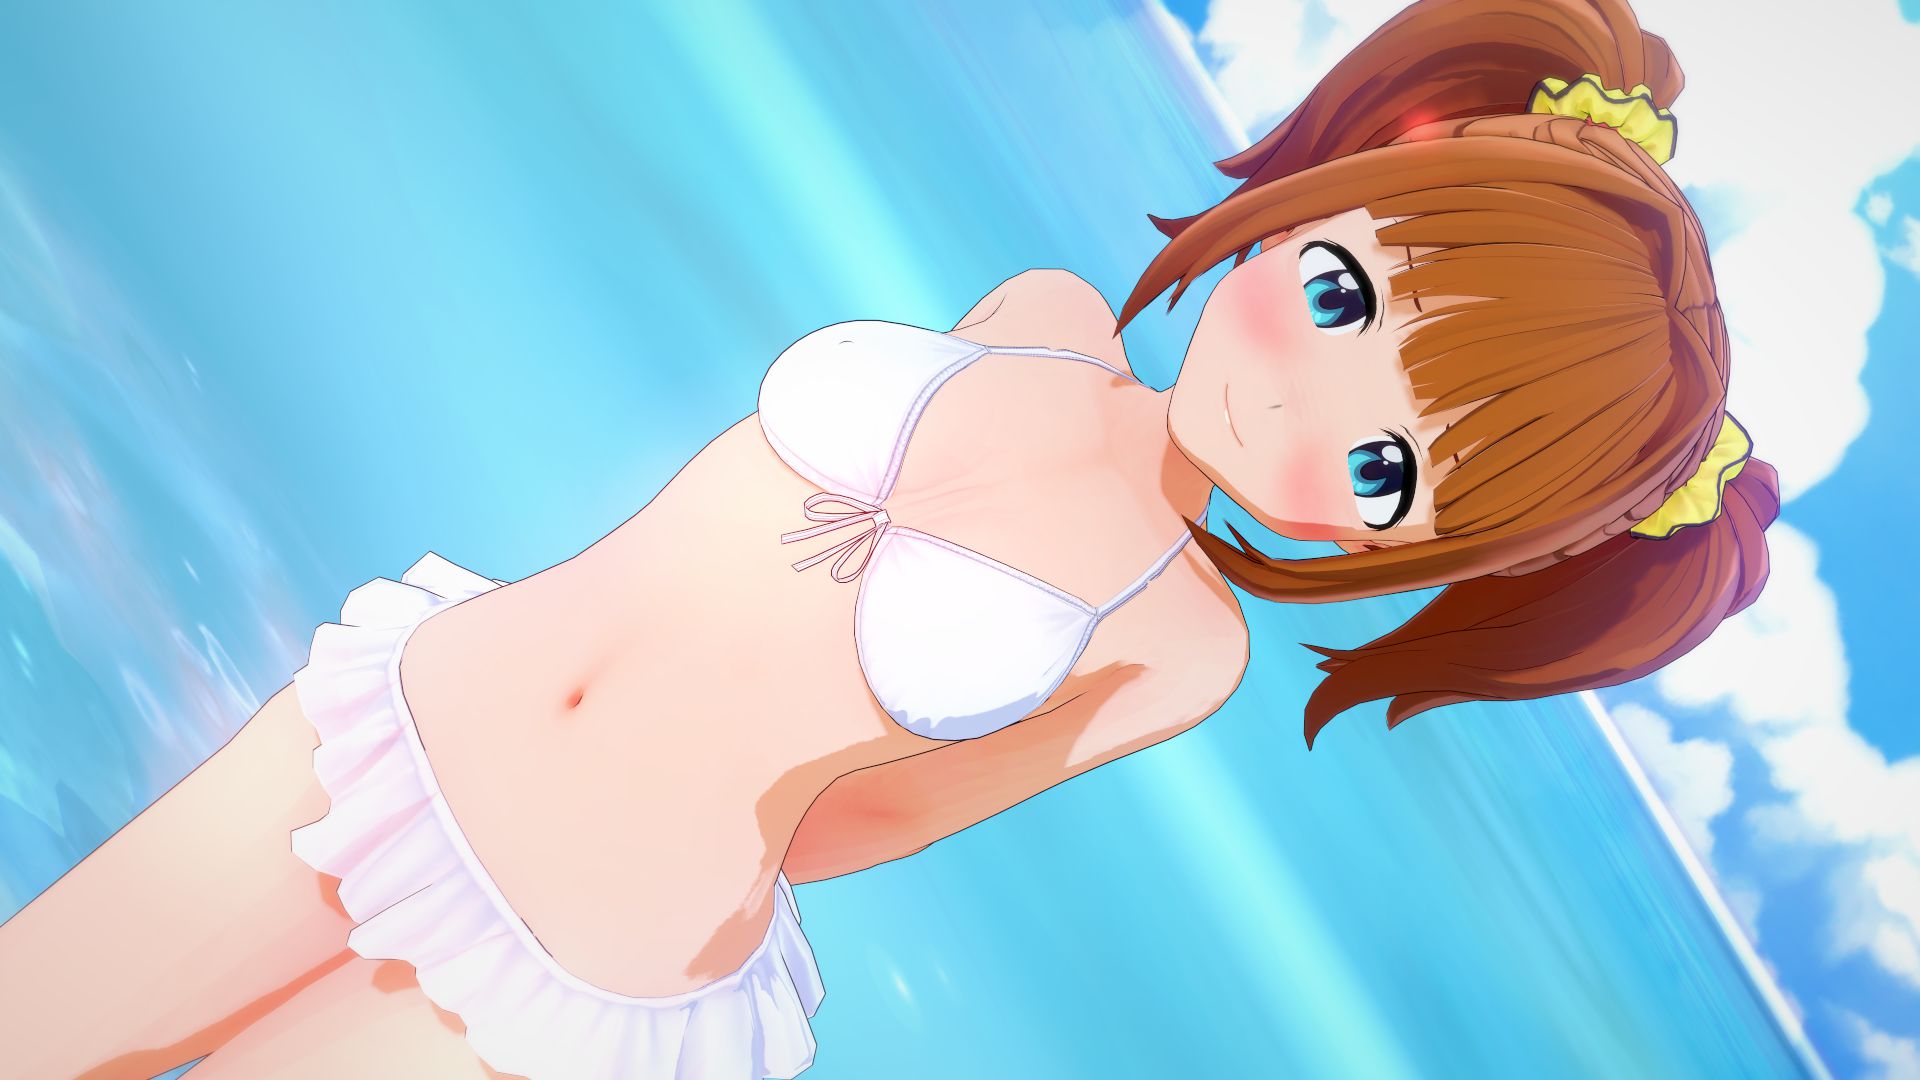 【Image】 The Idolmaster 765 Pro reproduced in eroge is talked about as too etch 2